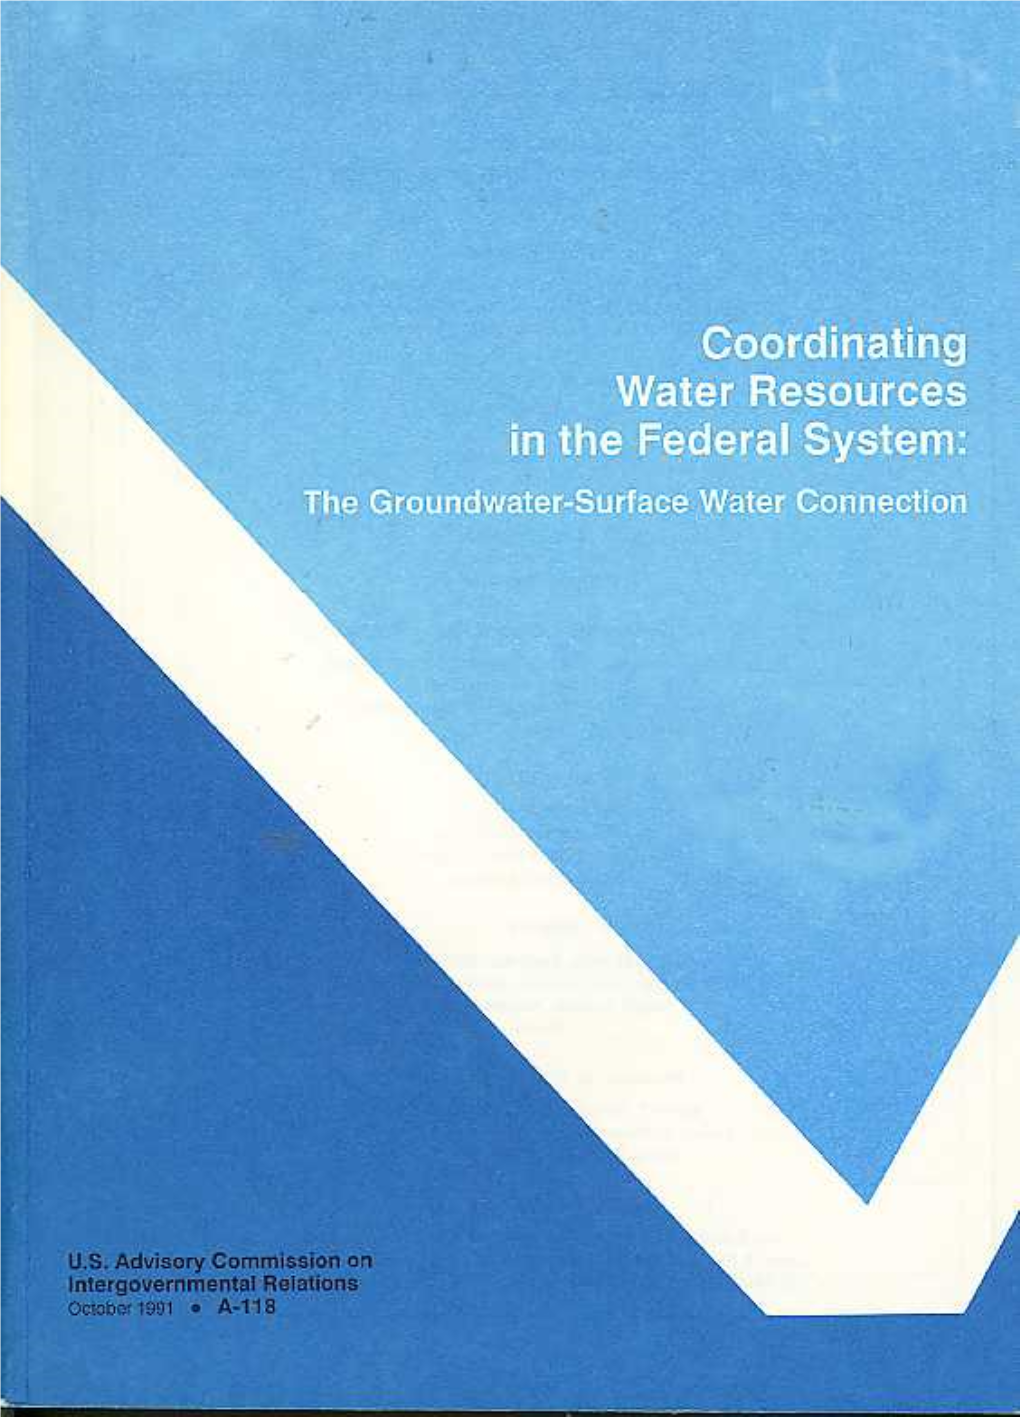 Coordinating Water Resources in the Federal System: the Groundwater-Surface Water Connection